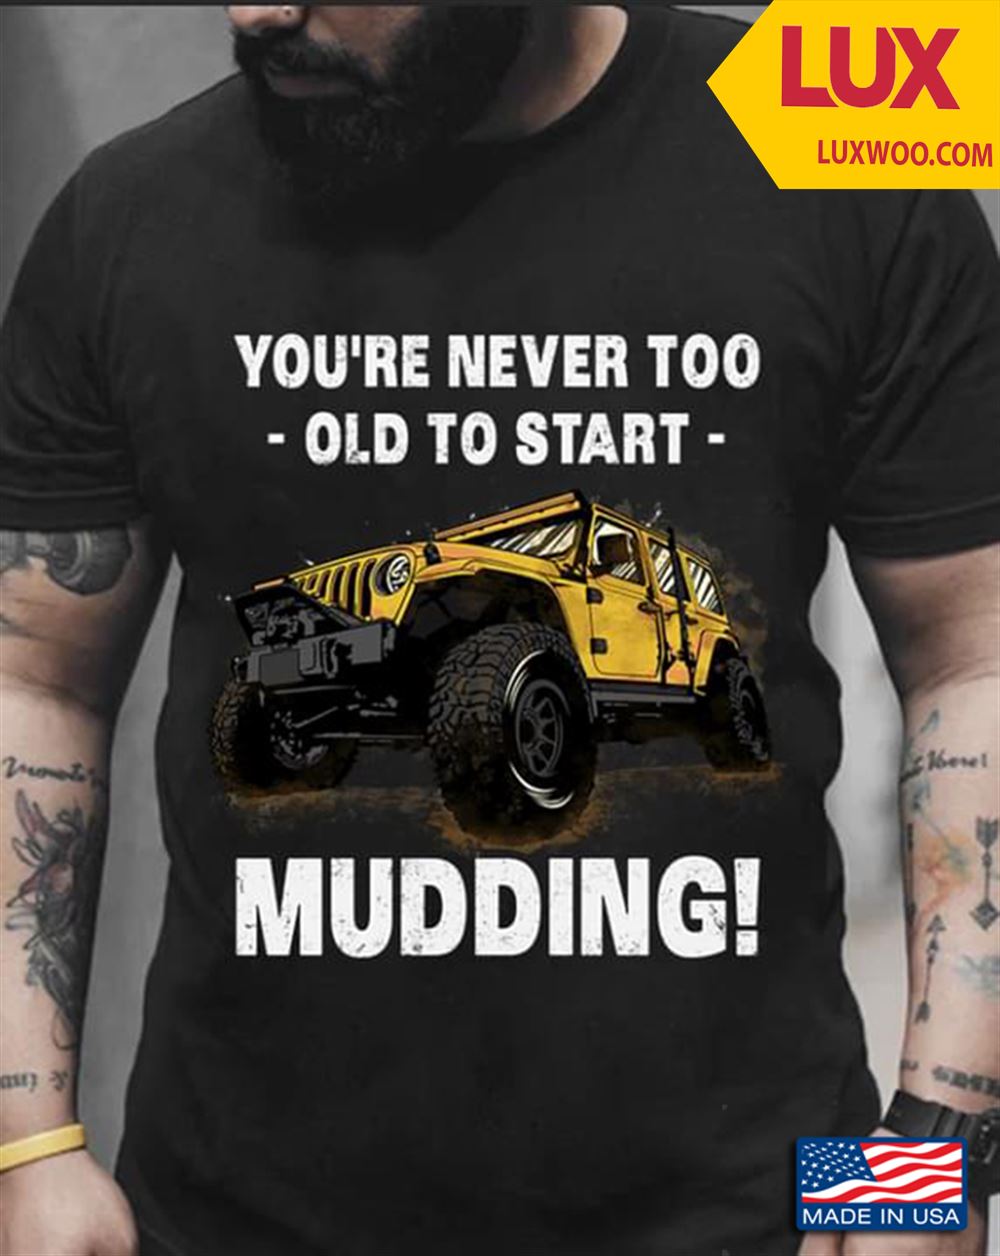 Jeep Youre Never Too Old To Start Mudding Shirt Size Up To 5xl